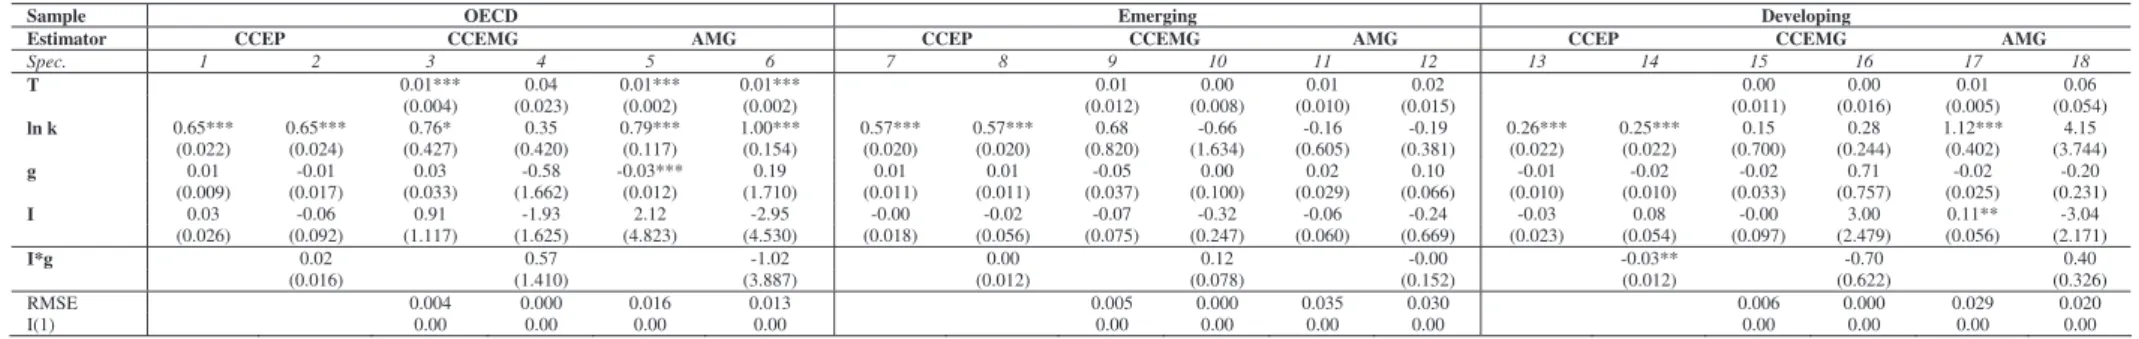 Table 7: Results of Estimations allowing for heterogeneous technology parameters and factor loadings